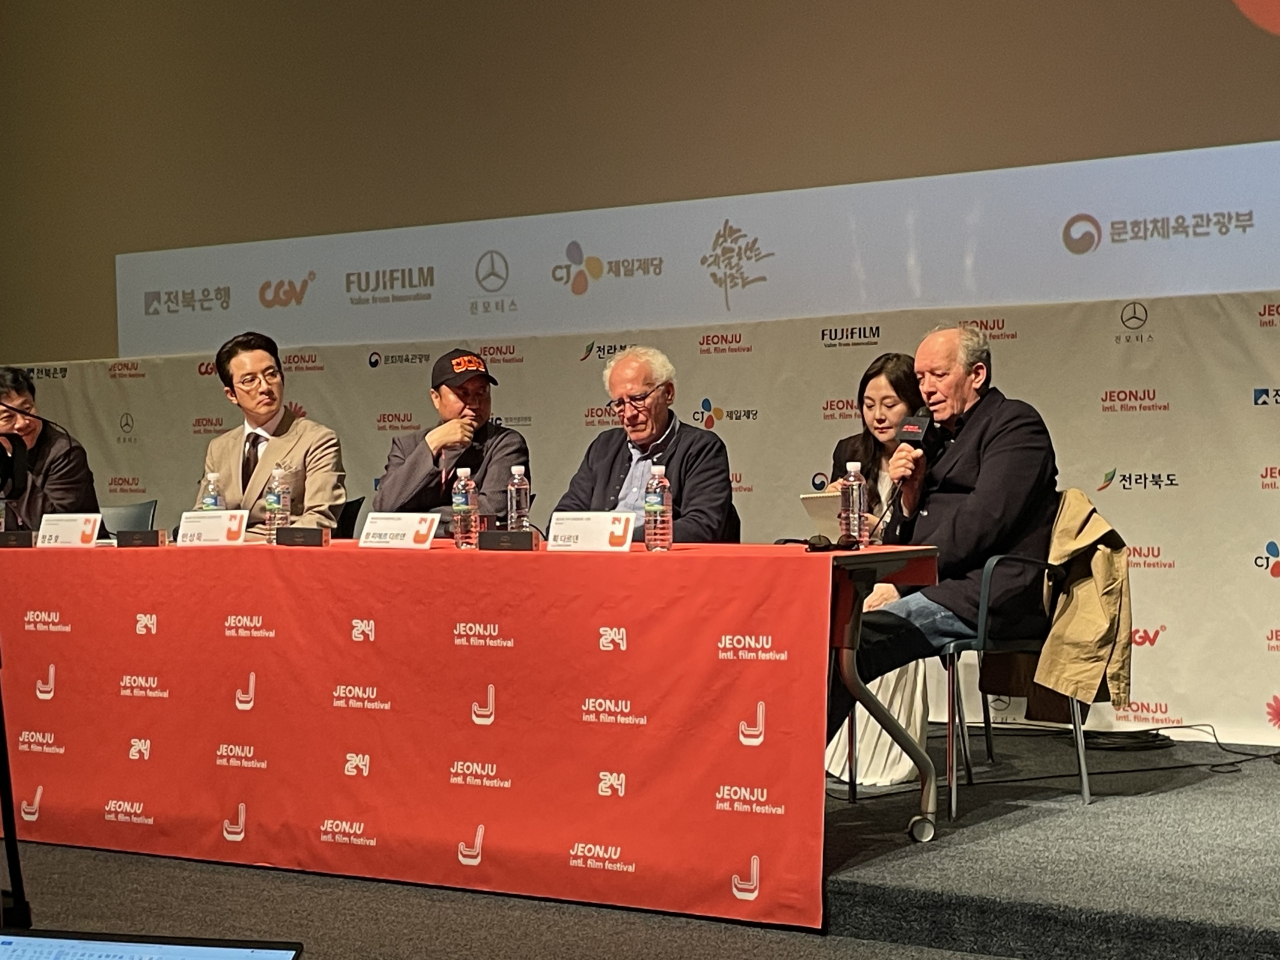 Luc Dardenne (right) and Jean-Pierre Dardenne (third from right) speak to reporters during a press conference for their film, “Tori and Lokita,” held at the Jeonju Cine Complex on Thursday. (Kim Da-sol/The Korea Herald)